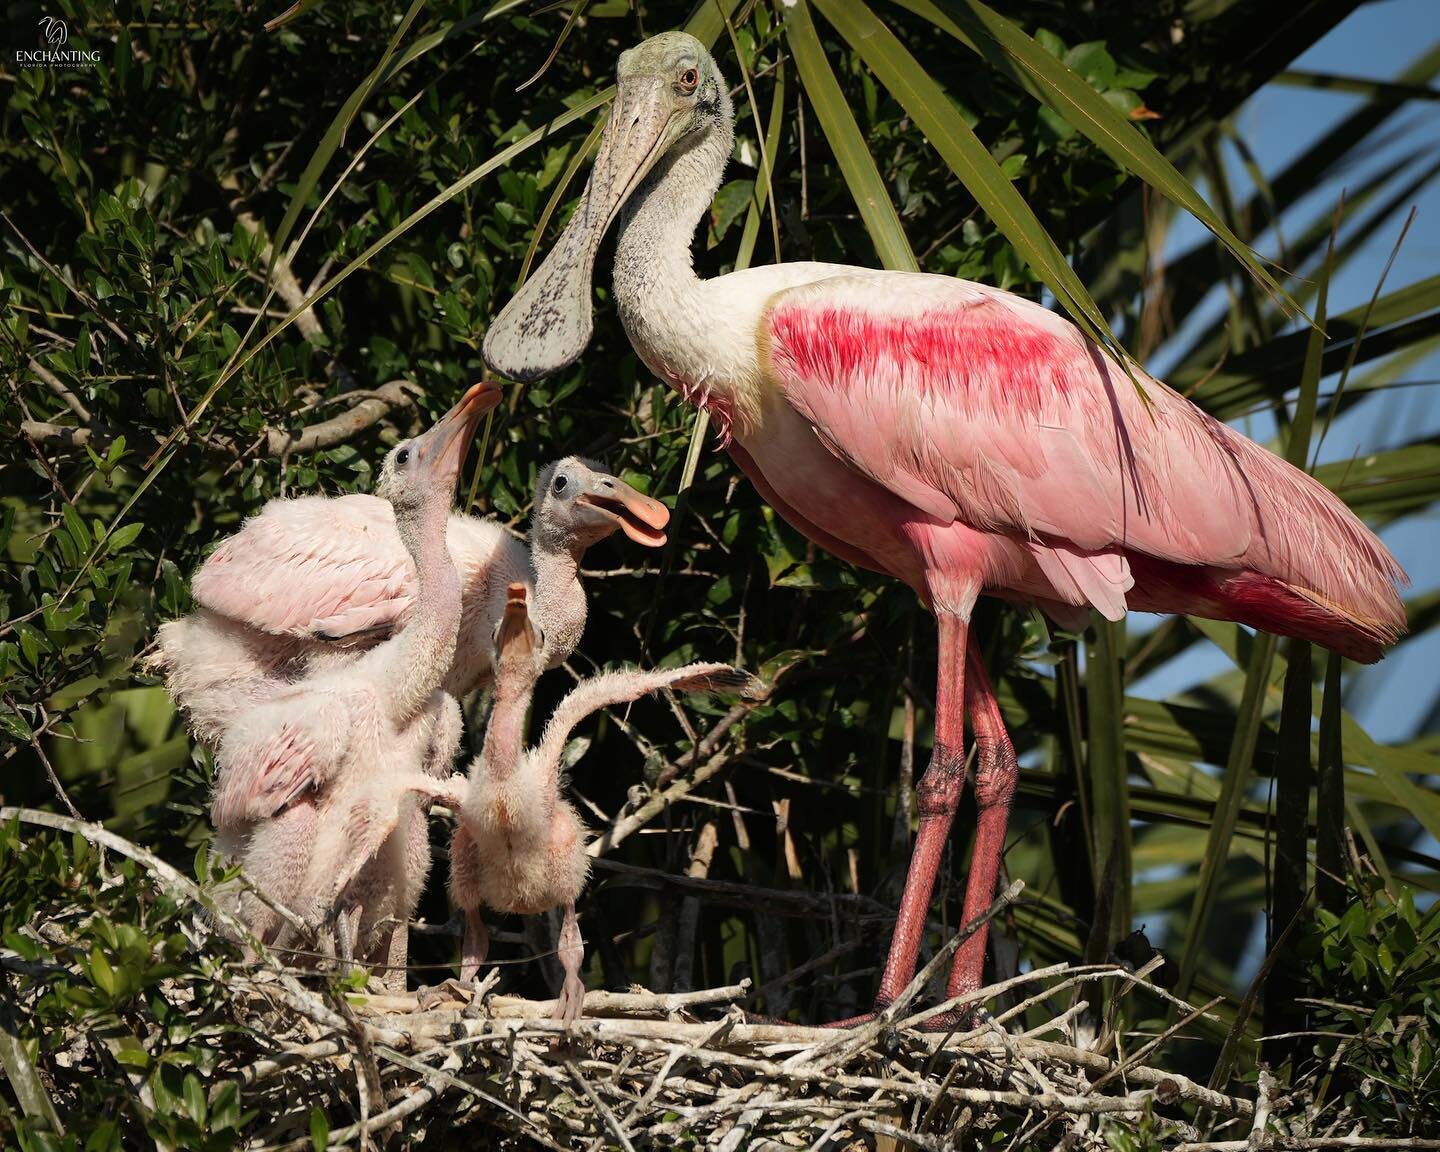 Happy #spoonbillsaturday Here is a &ldquo;portrait&rdquo; of the family from the Reel I shared the other day:) Hope you have a super special Saturday! 💕😊

Photo taken 5/17/23 @staugalligatorfarm 
#nestingseason #babybirds #roseatespoonbill #spoonbi